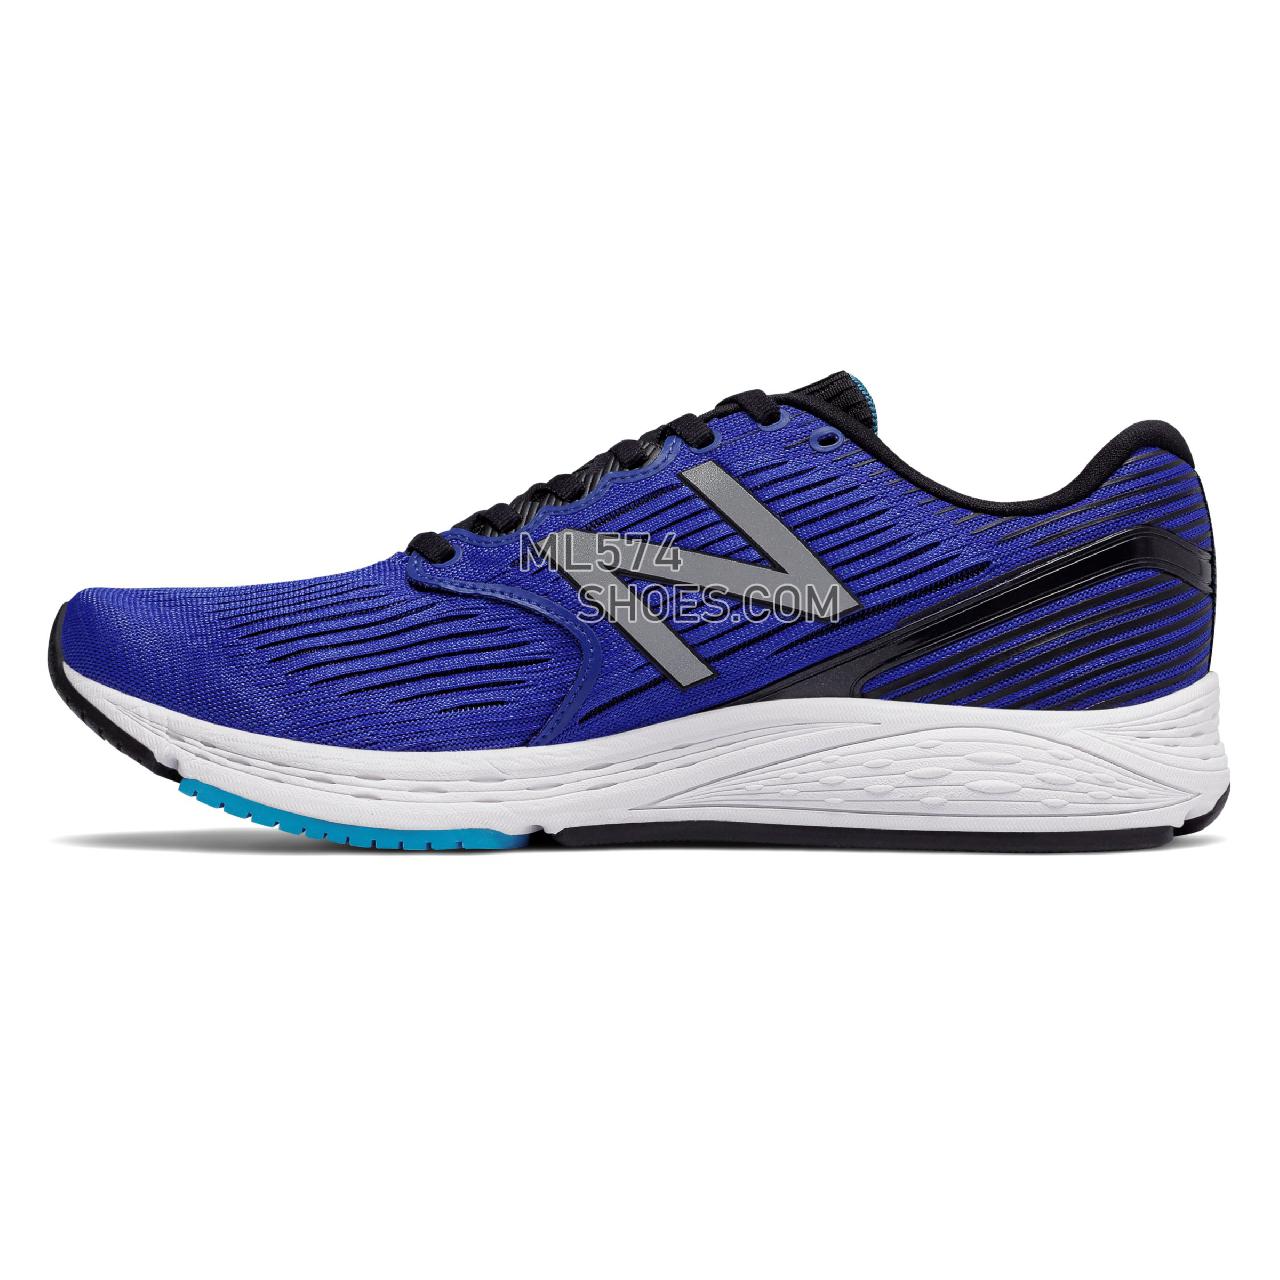 New Balance 890v6 - Men's 890 - Running Pacific with Maldives Blue and Black - M890BB6